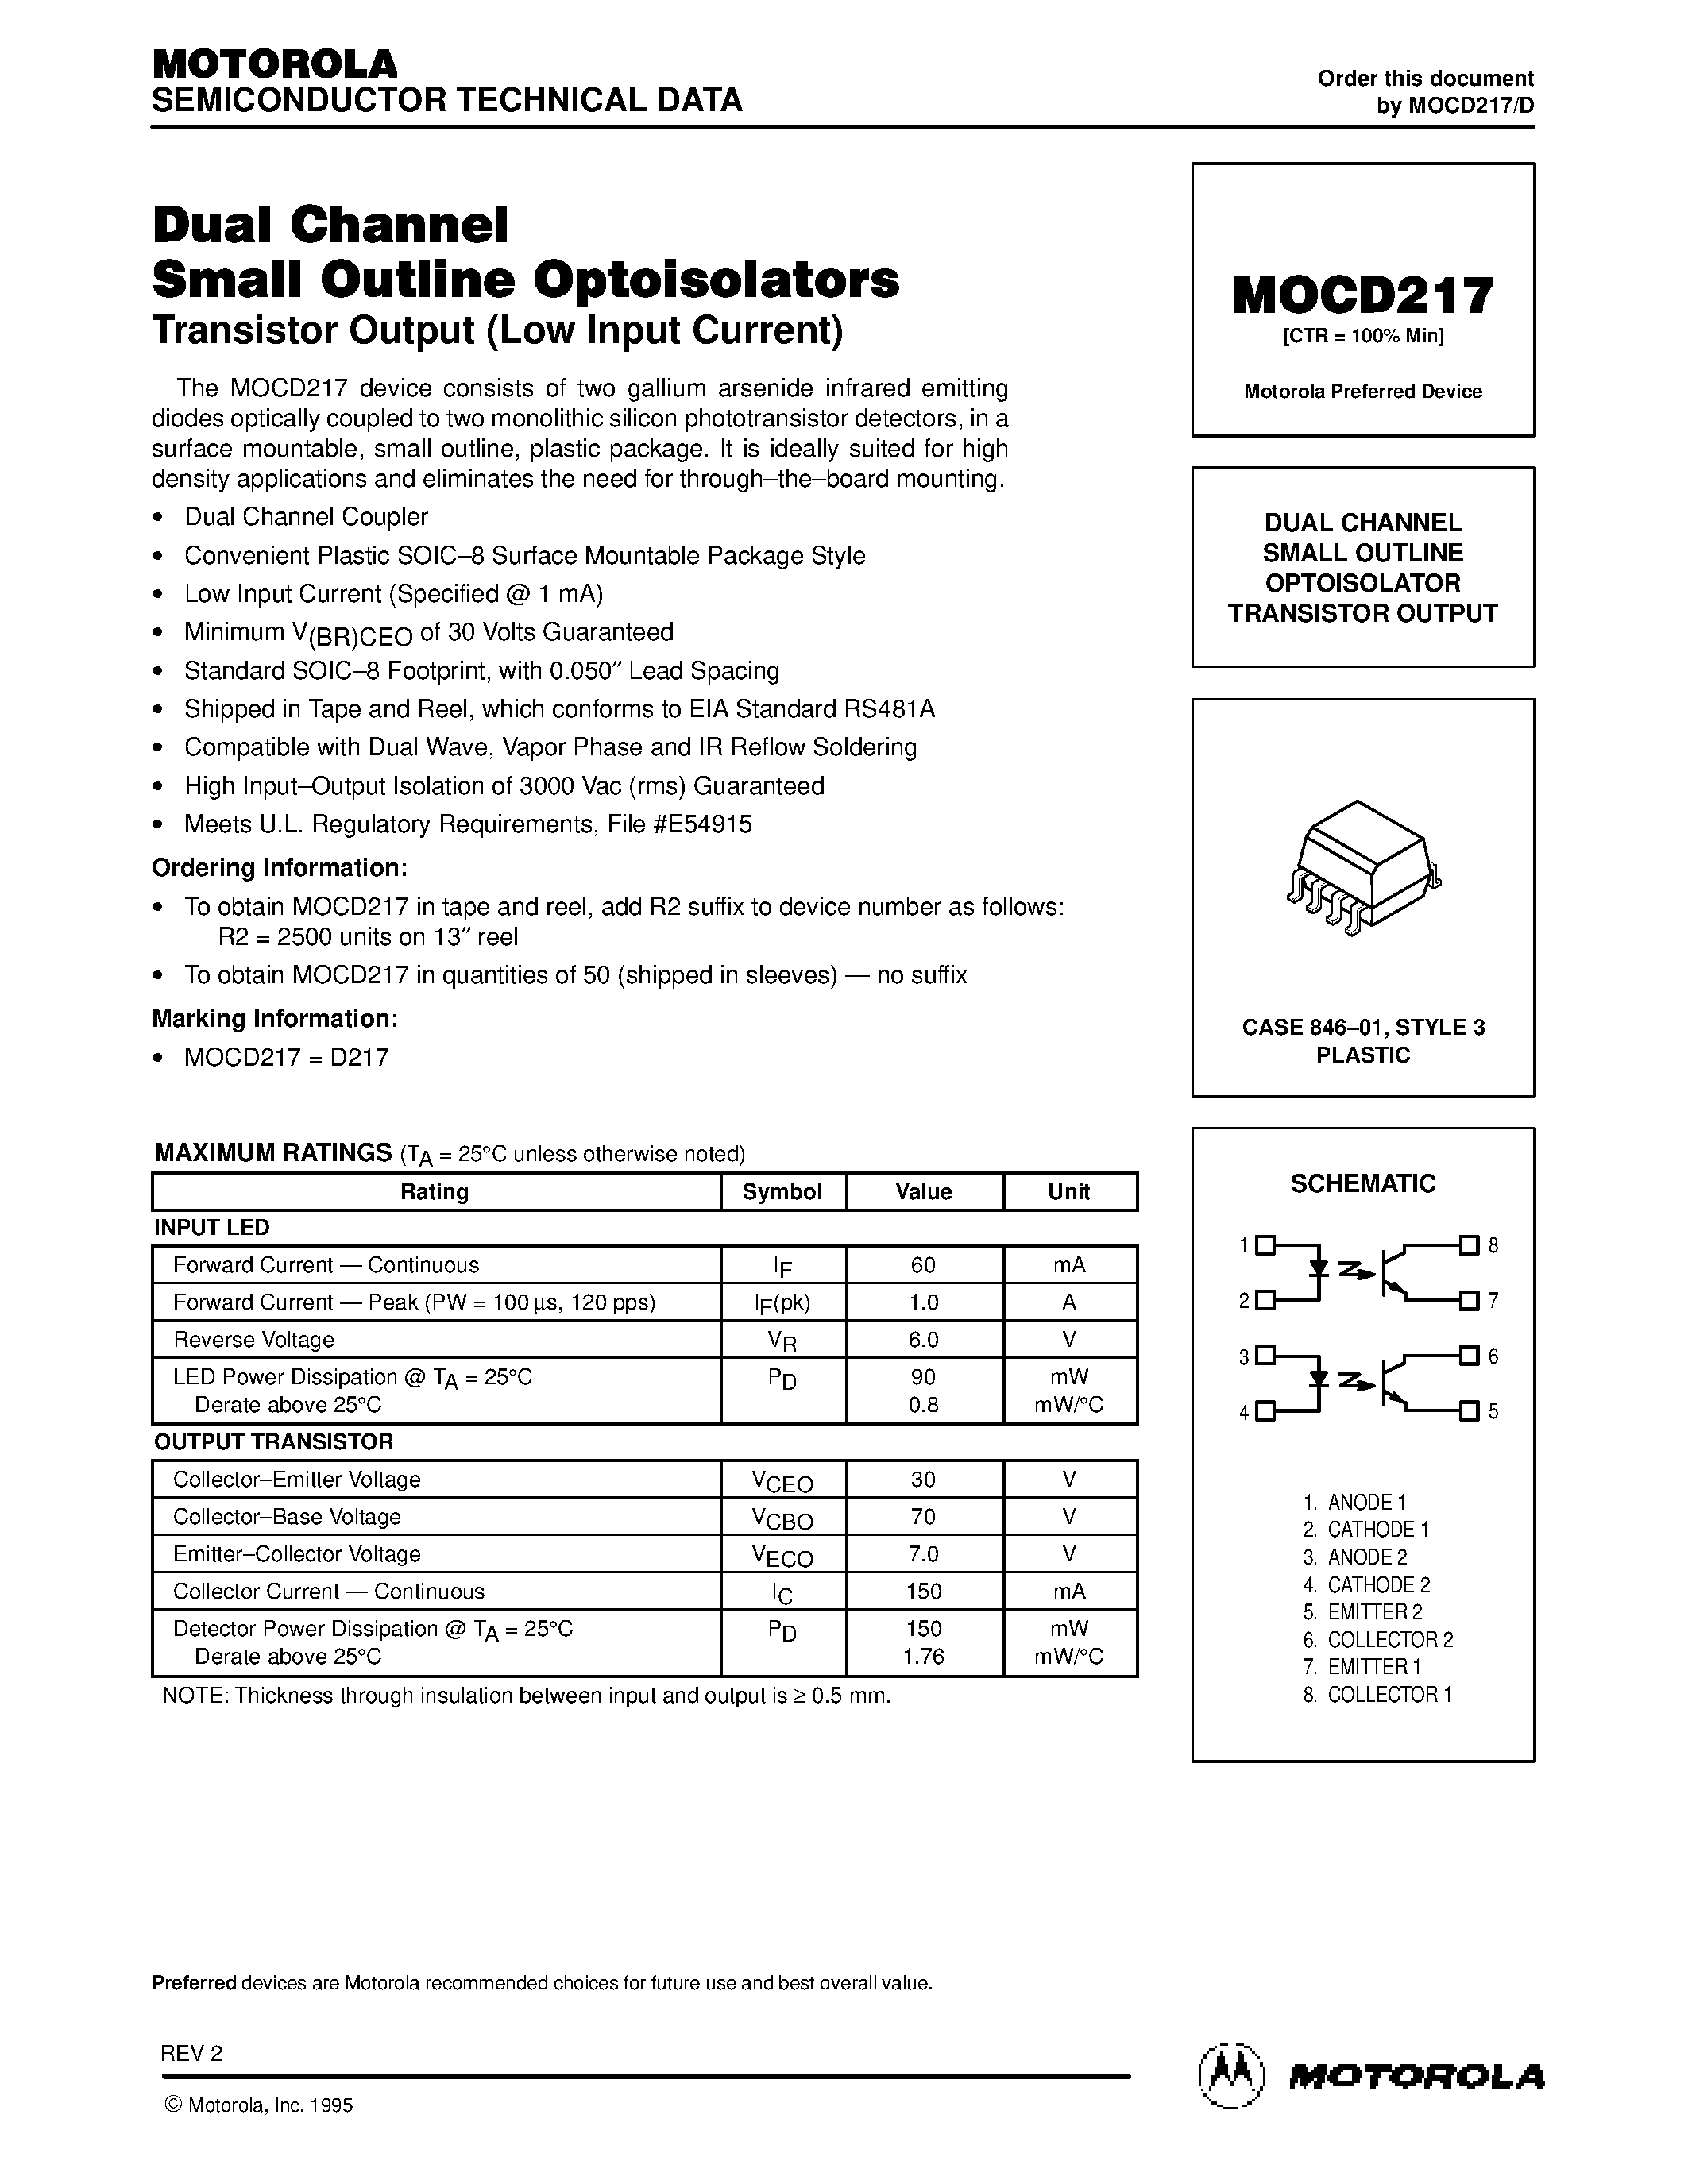 Datasheet MOCD217 - DUAL CHANNEL SMALL OUTLINE OPTOISOLATOR TRANSISTOR OUTPUT page 1